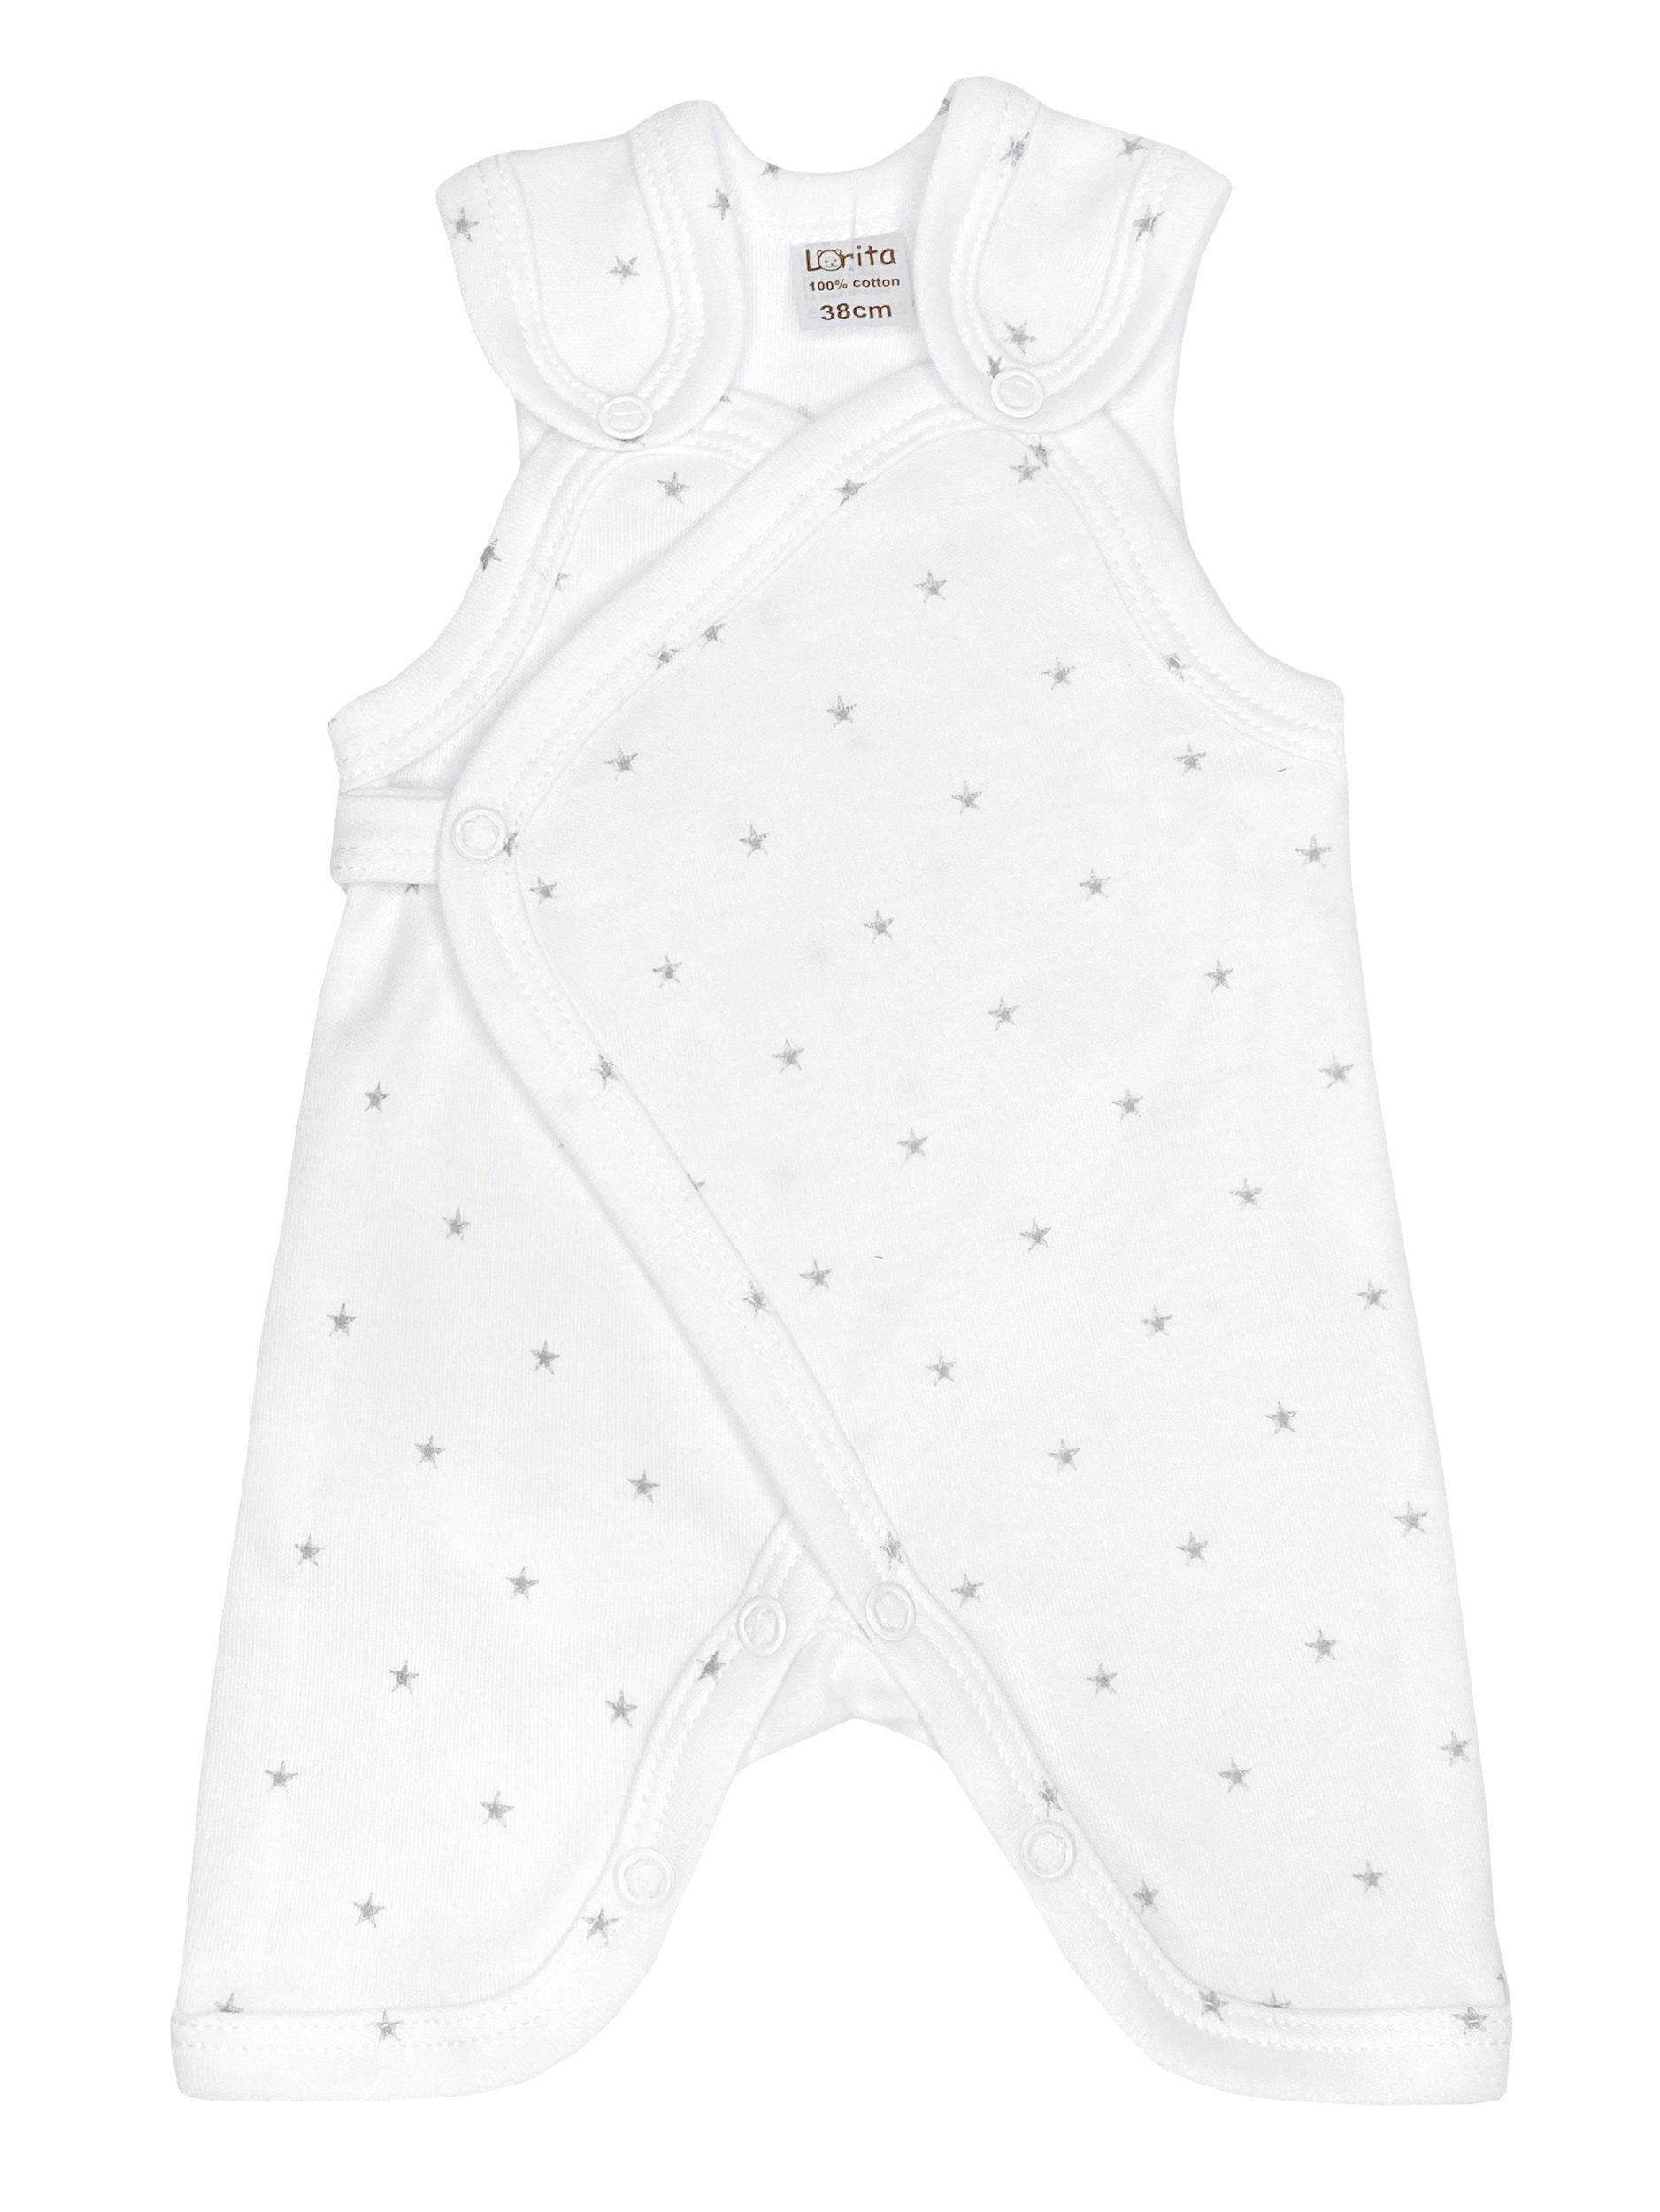 Early Baby Dungarees - White with Stars - Dungaree - Lorita